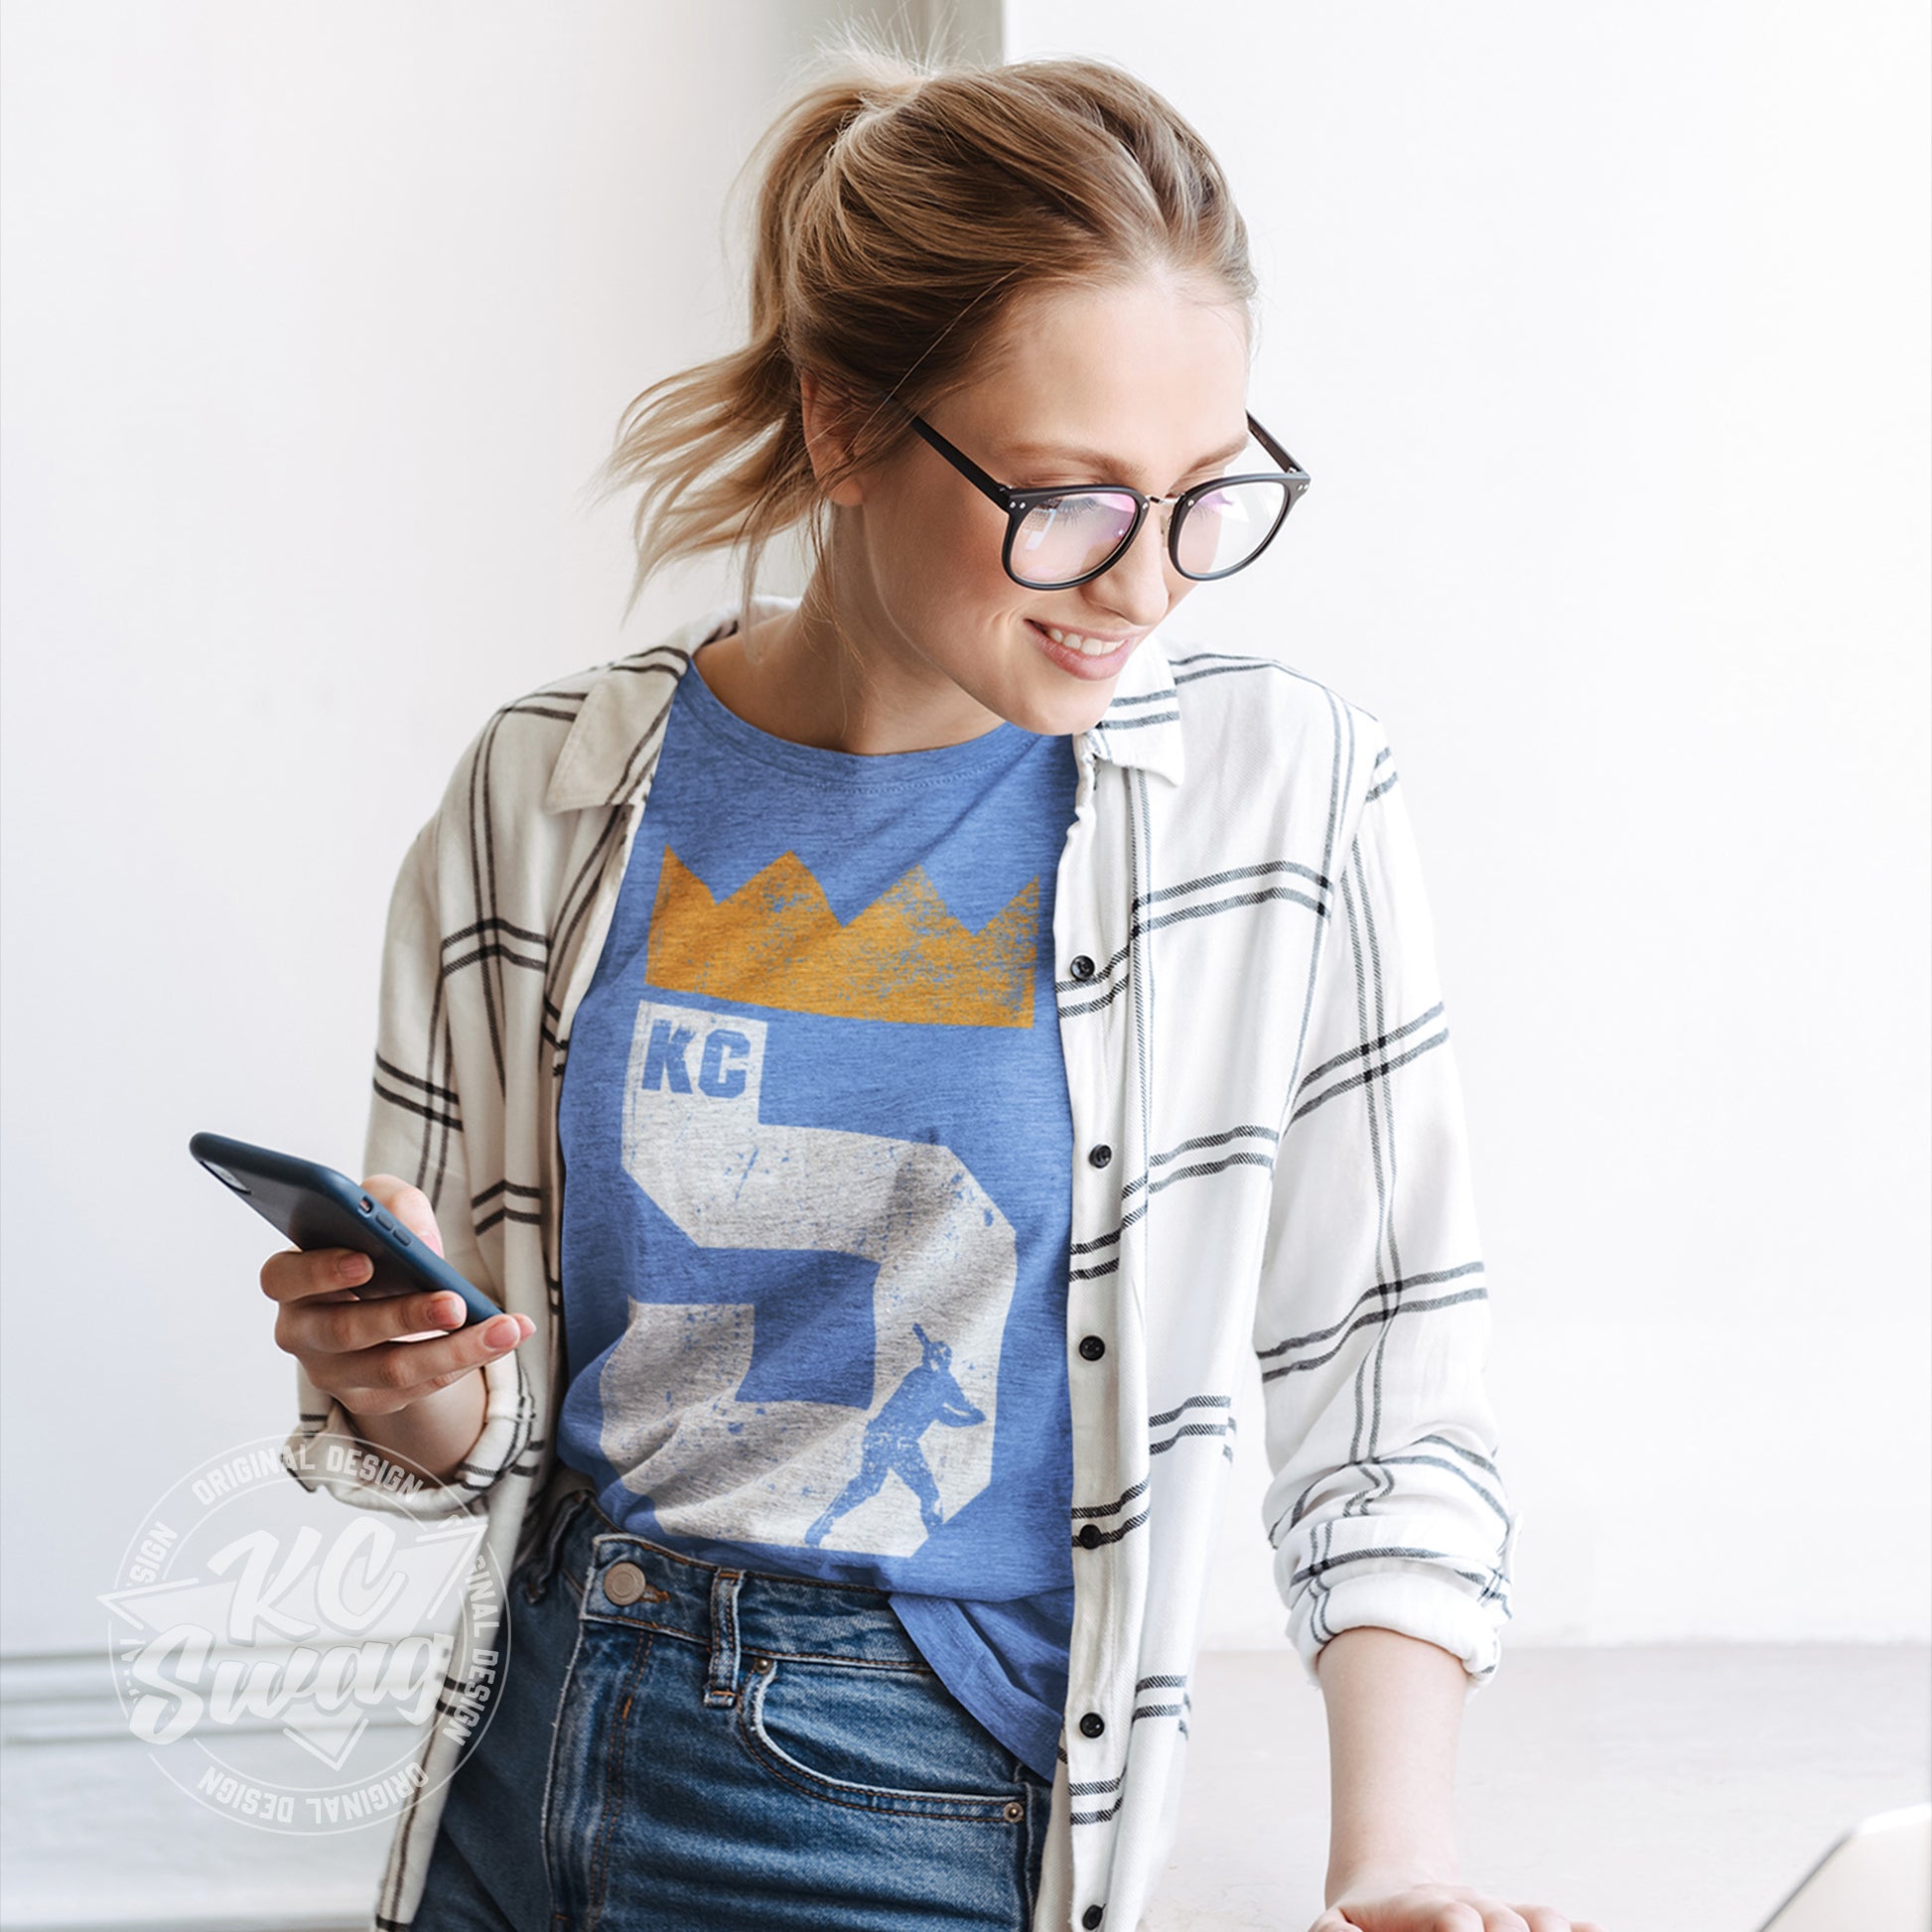 KC Swag - Kansas City Royals, Brett Five Crown design on heather columbia blue unisex t-shirt worn by female model under an open plaid shirt while looking away from her phone in an office setting